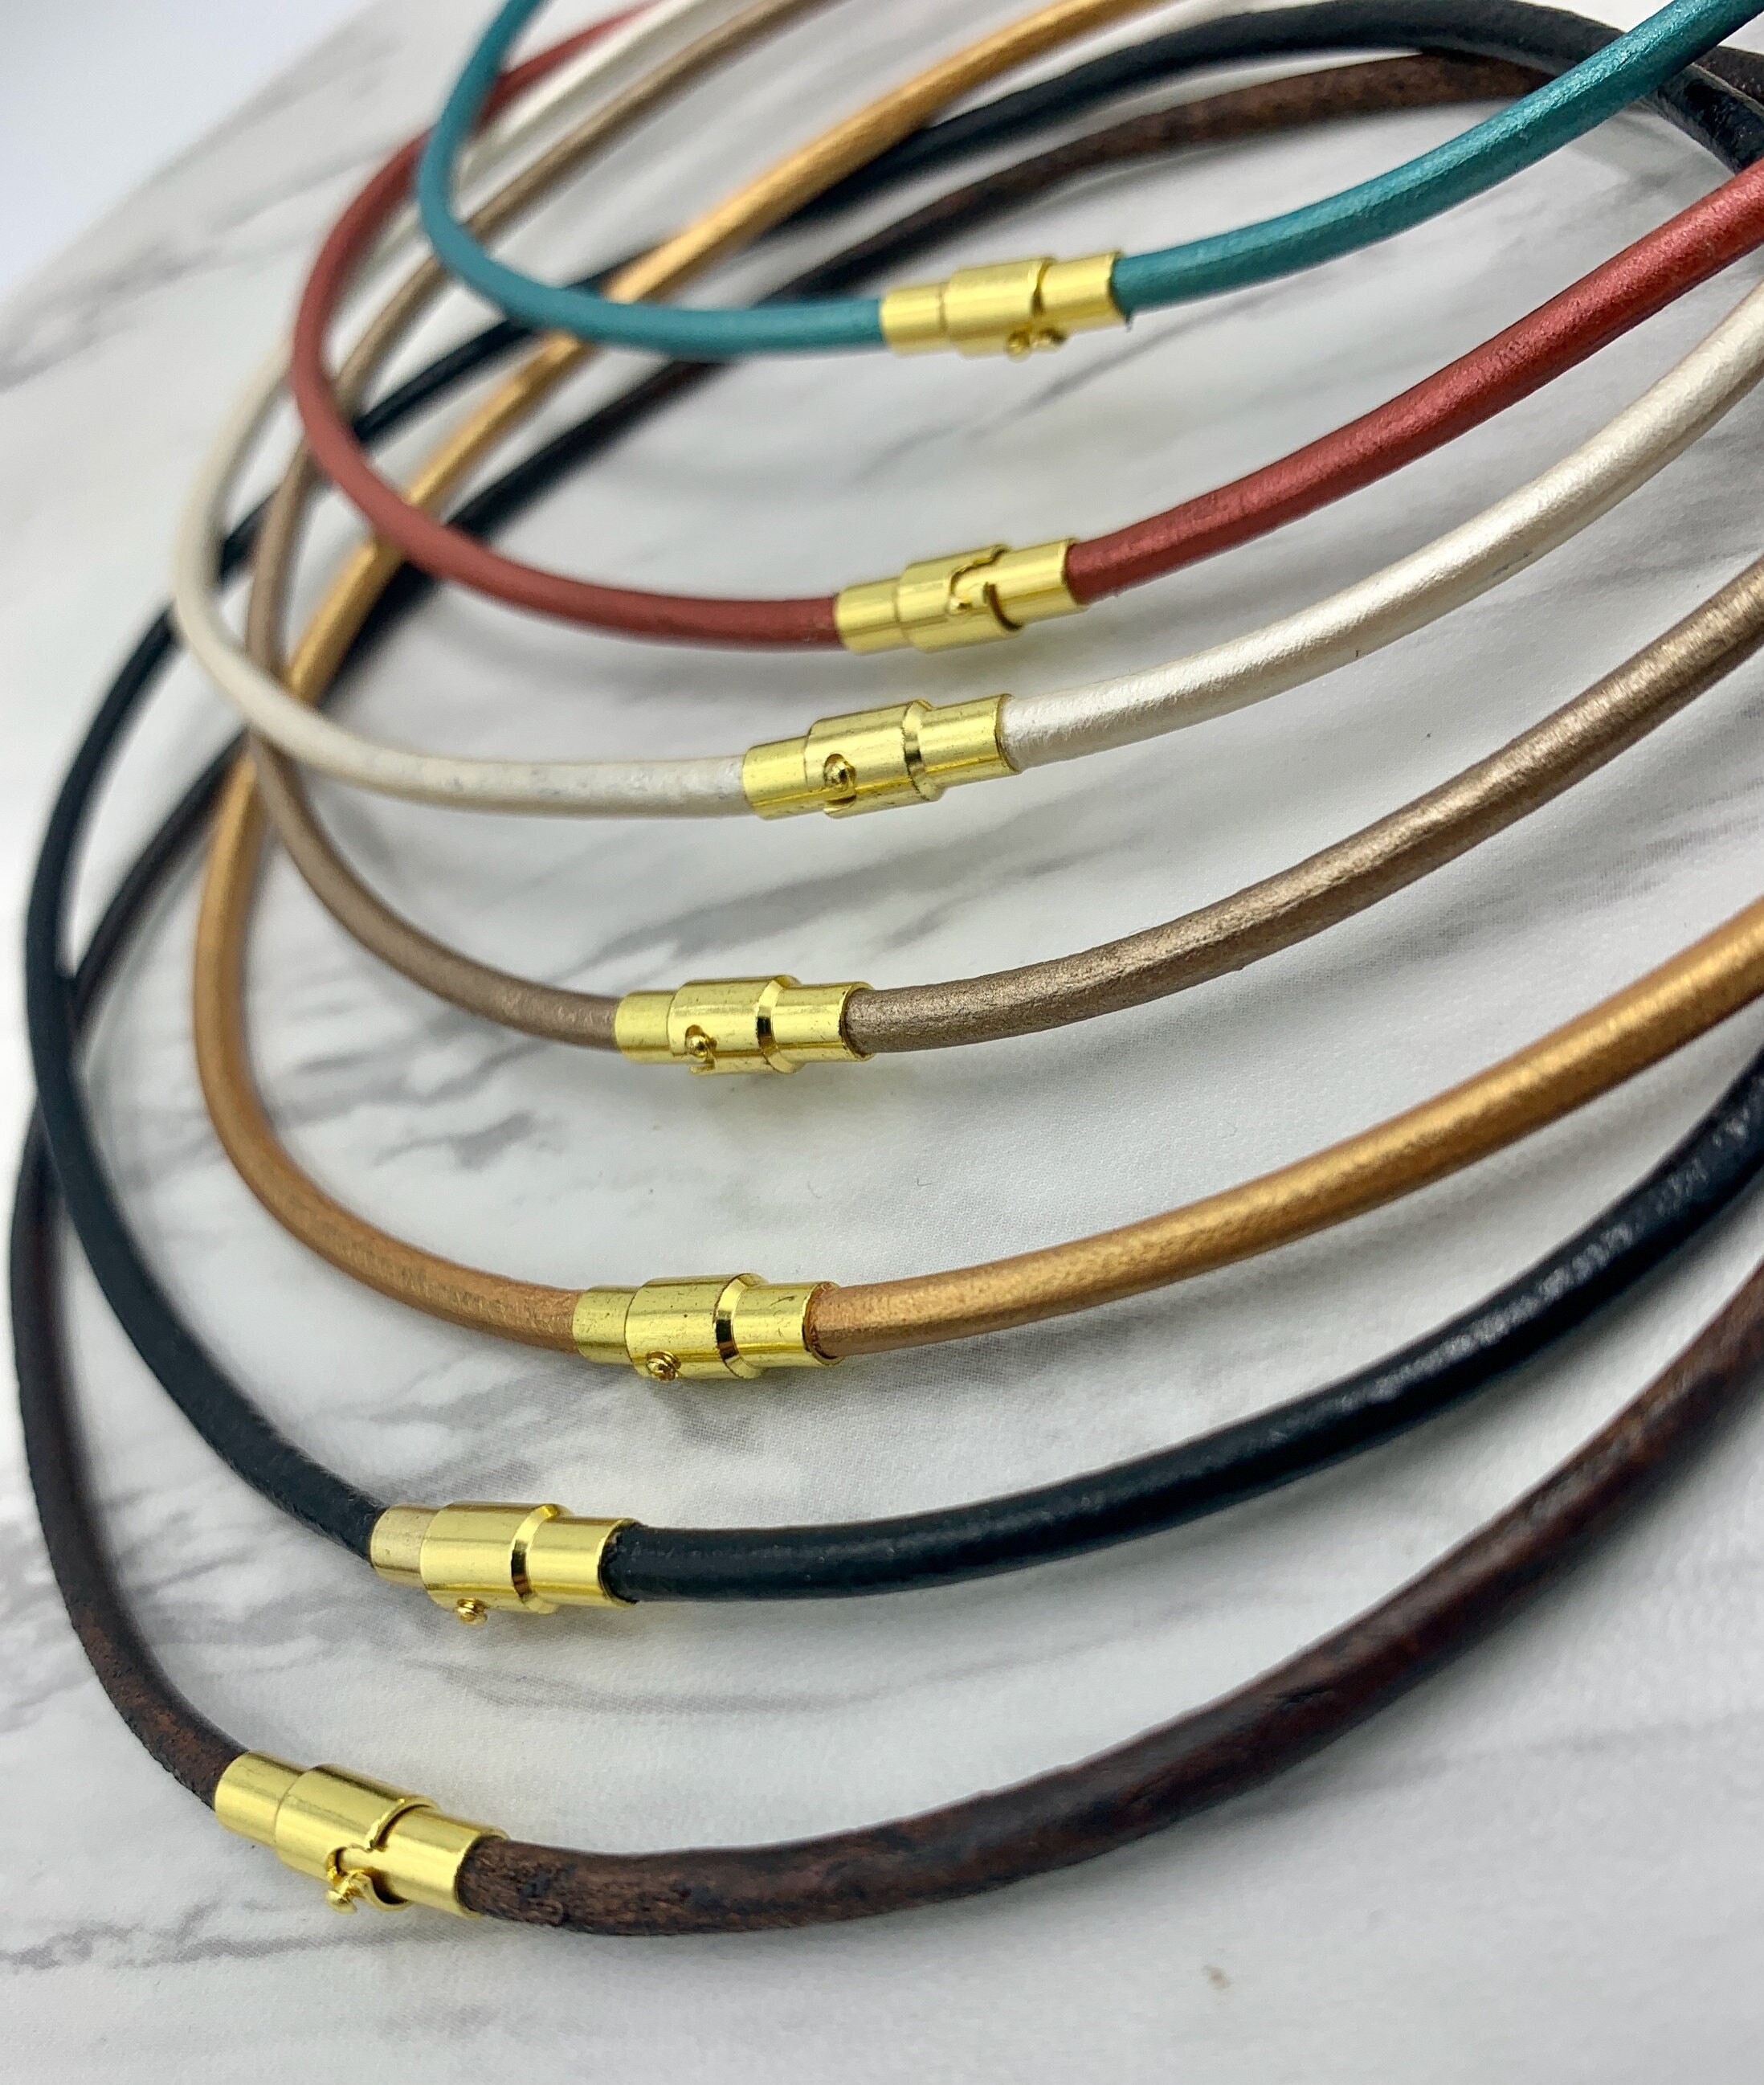 2mm Round Leather Cord, Genuine Leather Cord, Leather String, Natural  Leather Cord, Necklace Cord, Bracelet Cord, 22 Colors, LC2-2 